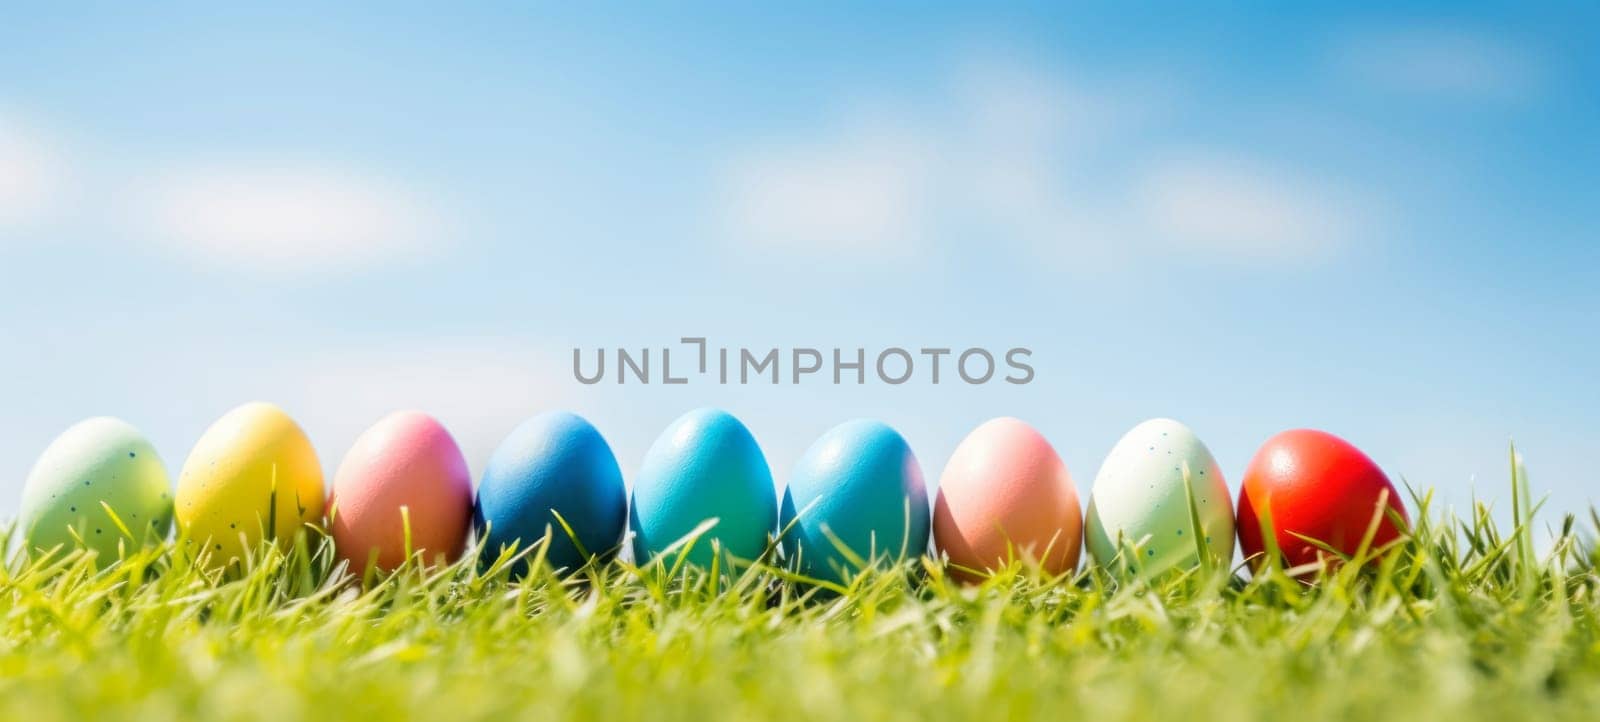 Colorful Easter Eggs Lined Up on Sunny Grass by andreyz